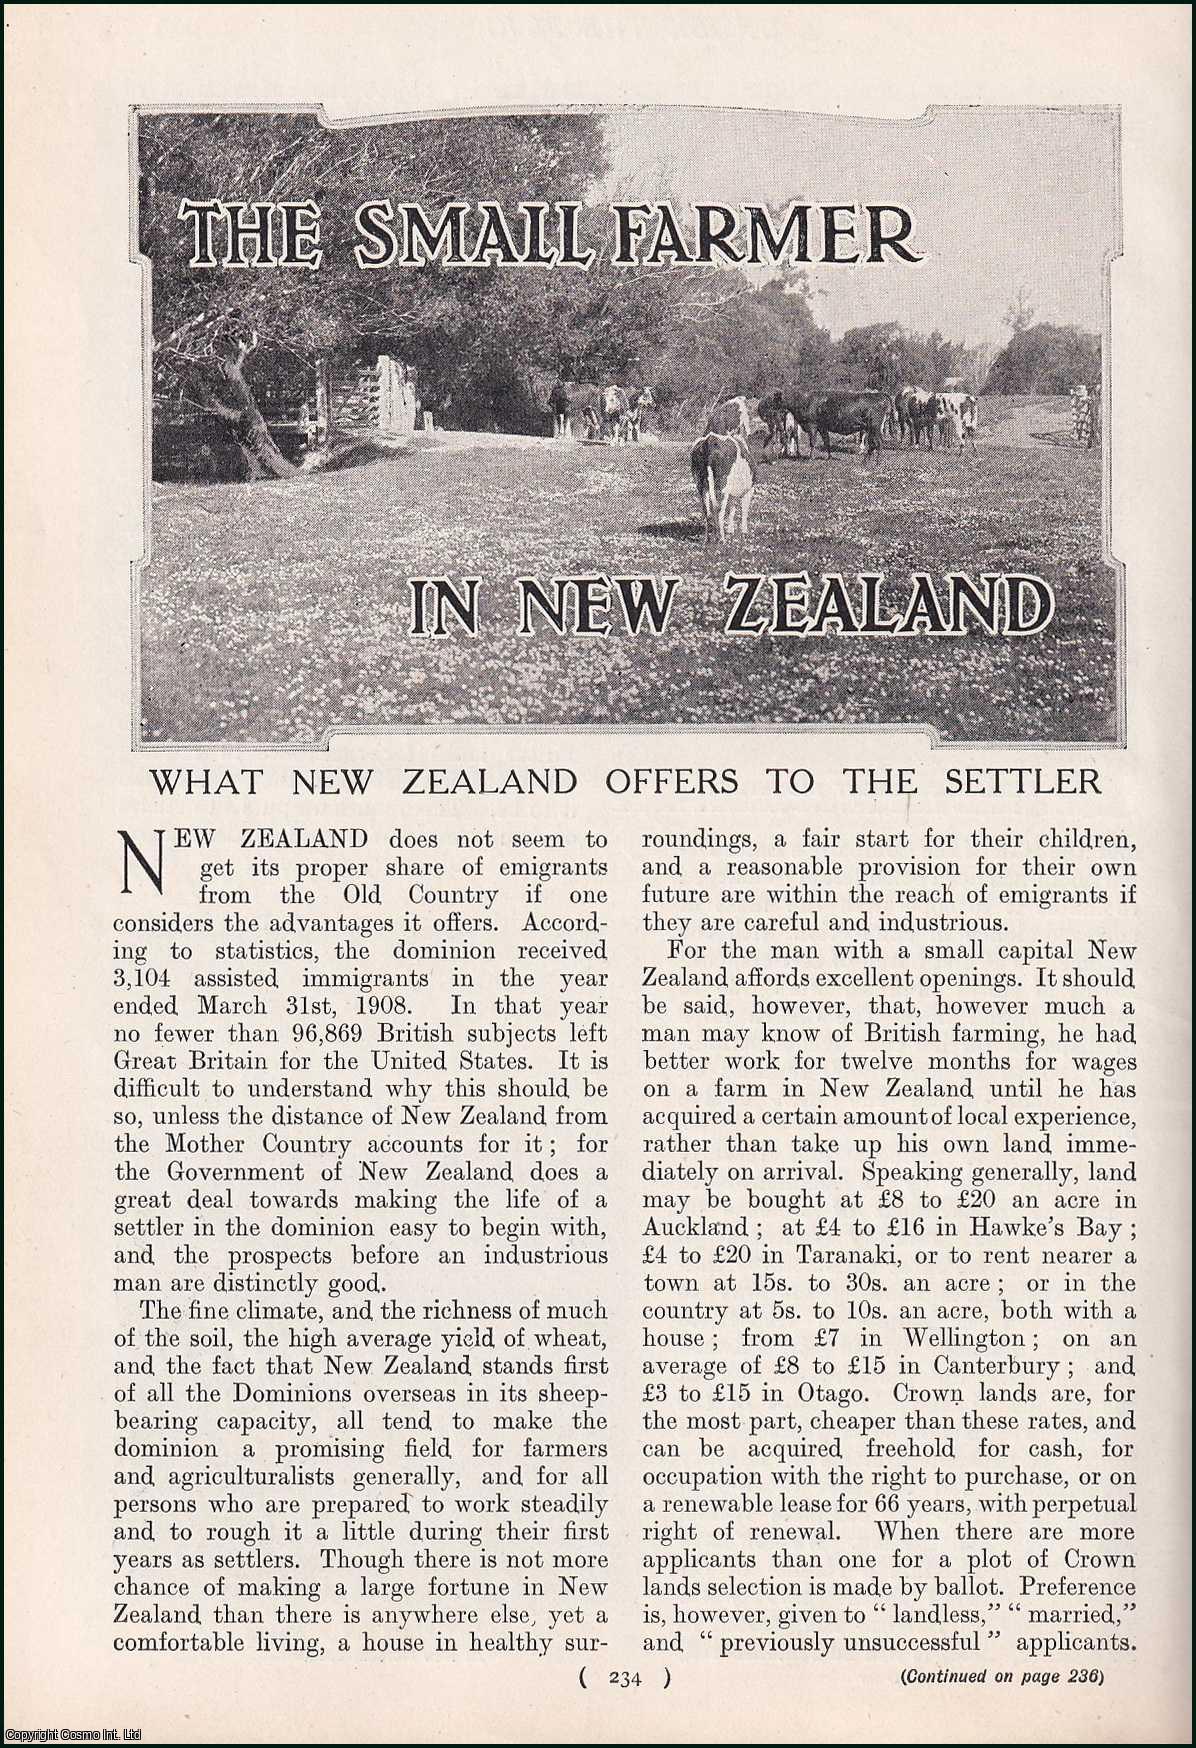 B.S. - The Small Farmer in New Zealand : what New Zealand offers to the Settler. An uncommon original article from the Harmsworth London Magazine, 1910.